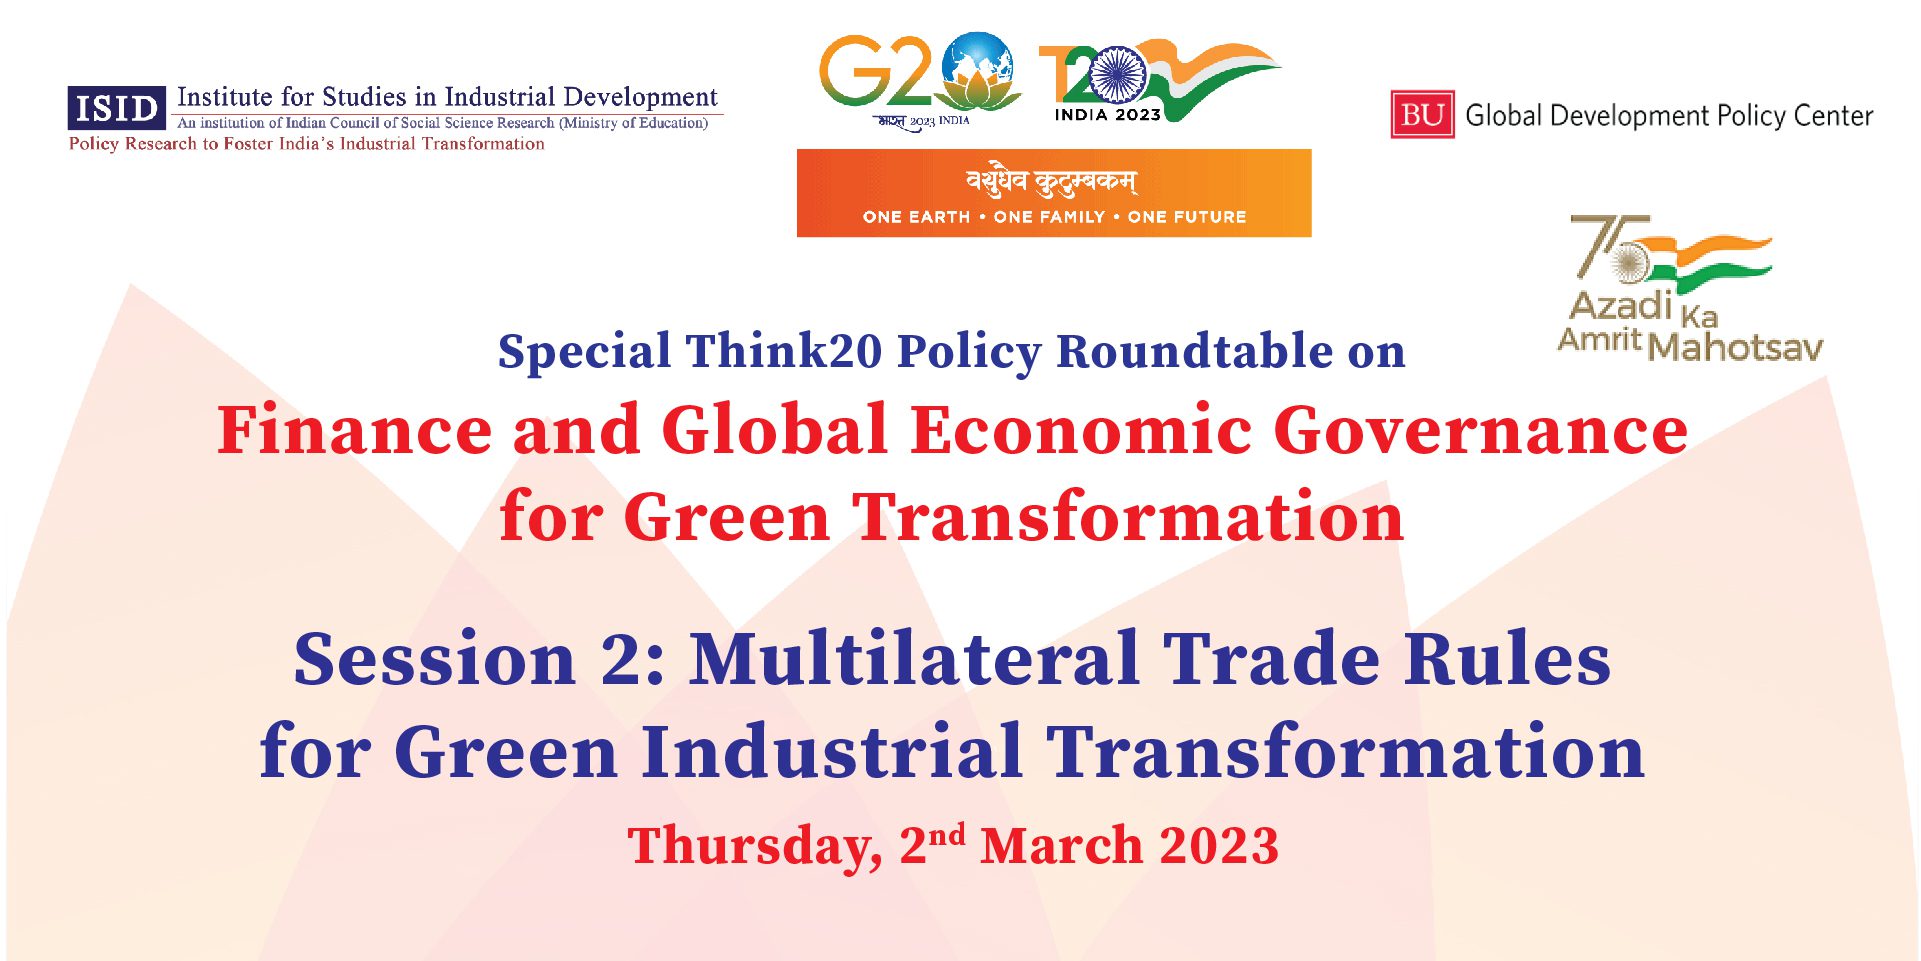 ISID BU-GDPC T-20 Special PRT: Multilateral Trade Rules for Green Industrial Transformation